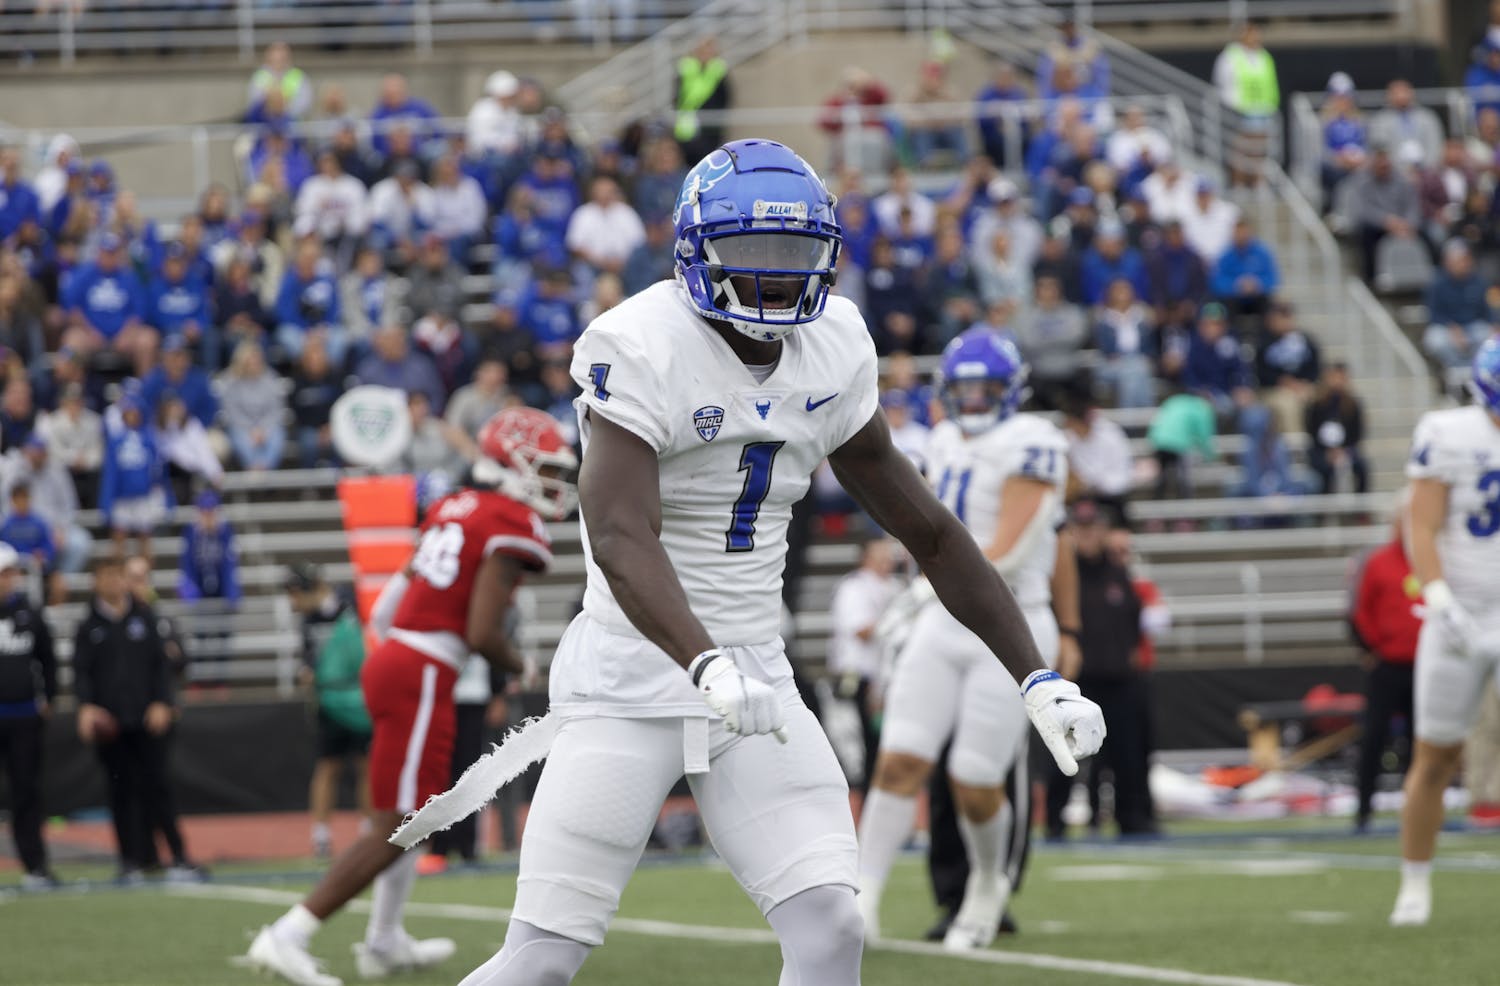 UB wide receiver Justin Marshall signs with Atlanta Falcons - The Spectrum